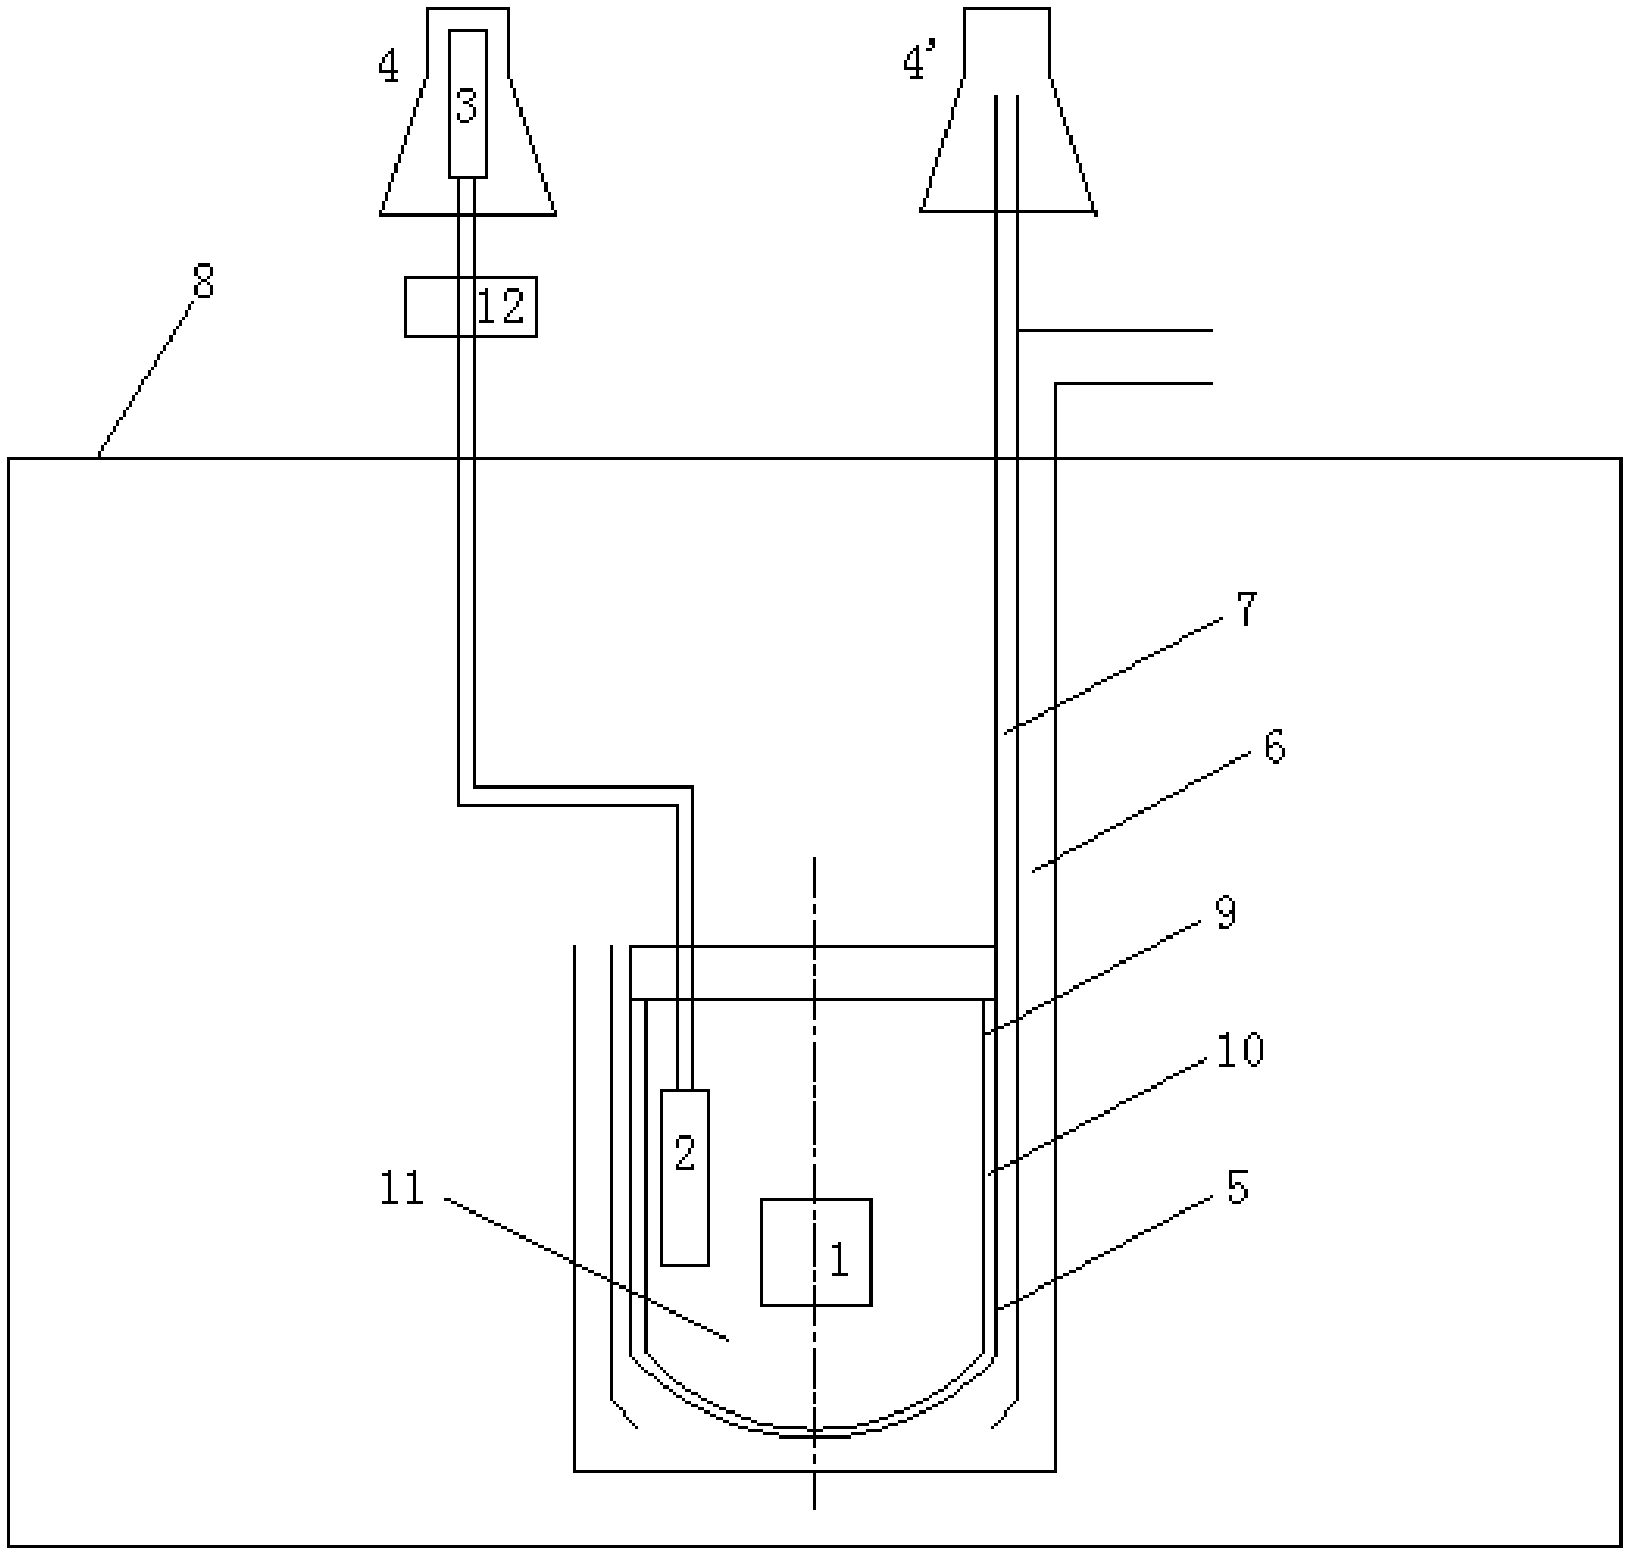 Compound accident residual heat removal system for accelerator-driven sub-critical reactor